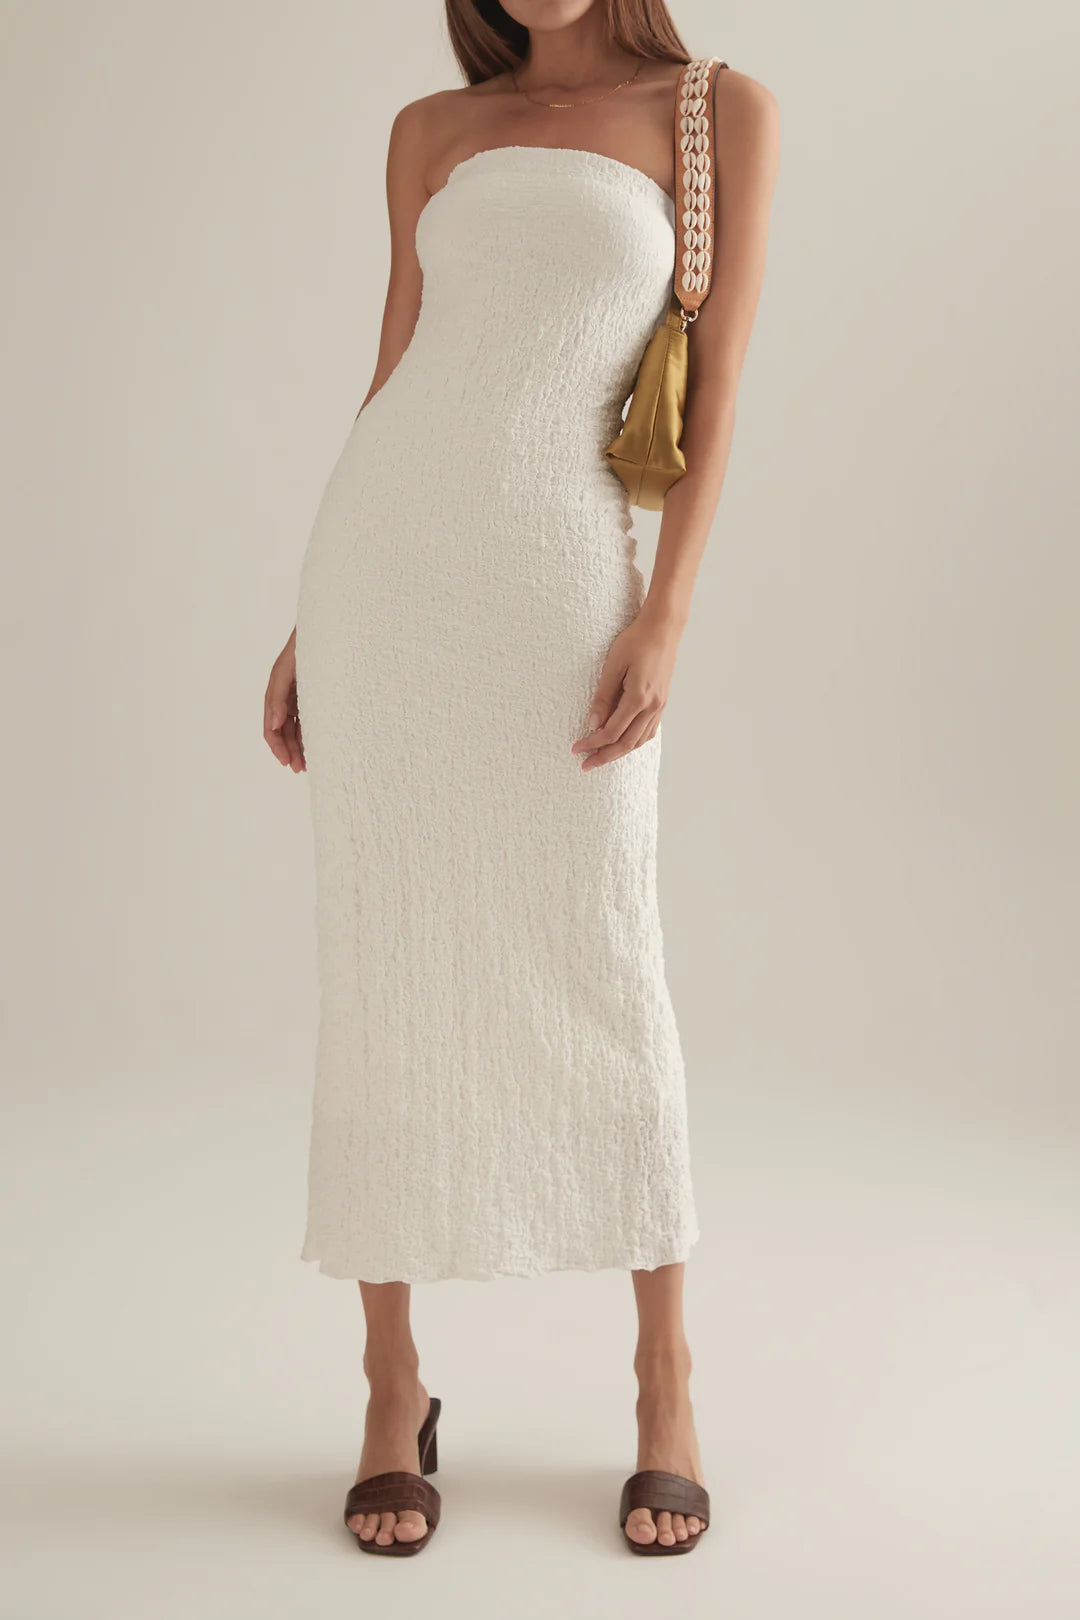 Ownley - Petra Dress in White